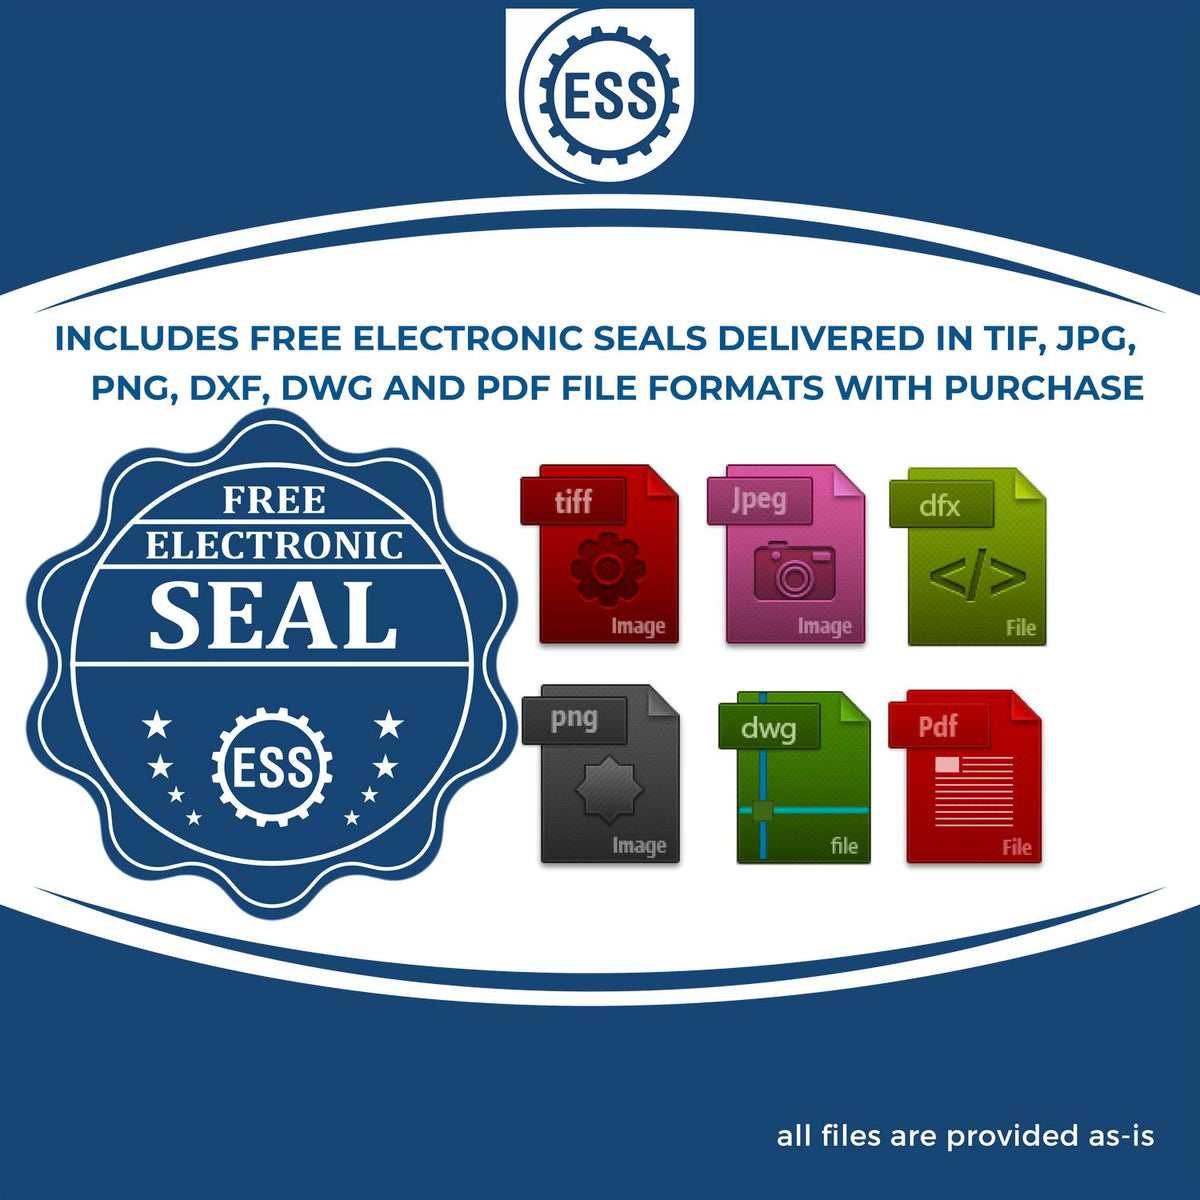 An infographic for the free electronic seal for the Heavy Duty Cast Iron Maine Land Surveyor Seal Embosser illustrating the different file type icons such as DXF, DWG, TIF, JPG and PNG.